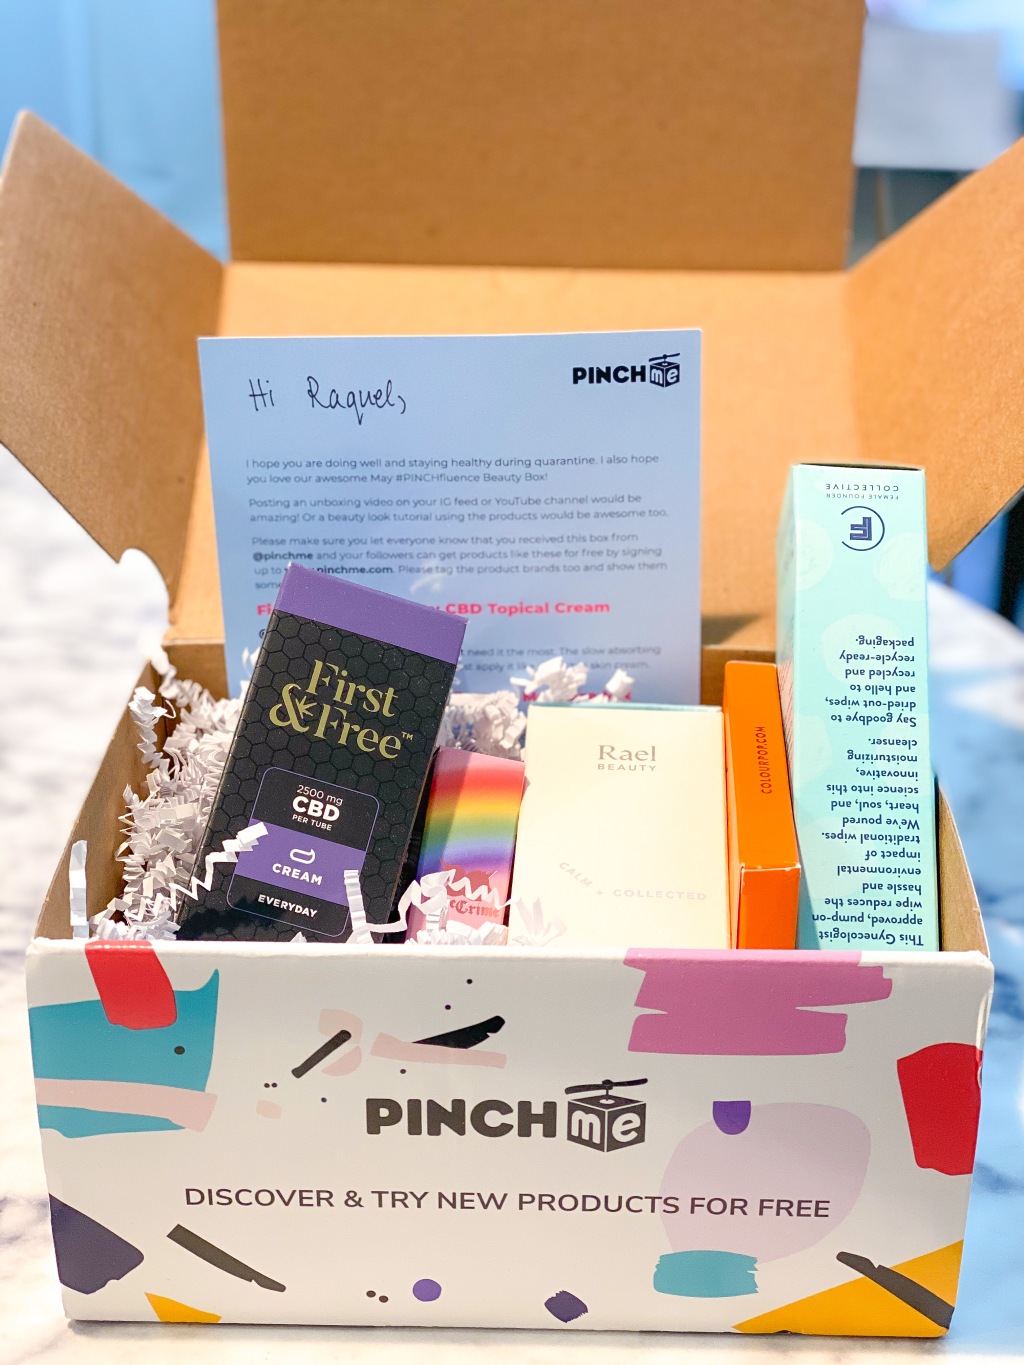 How to get free products: Pinchme